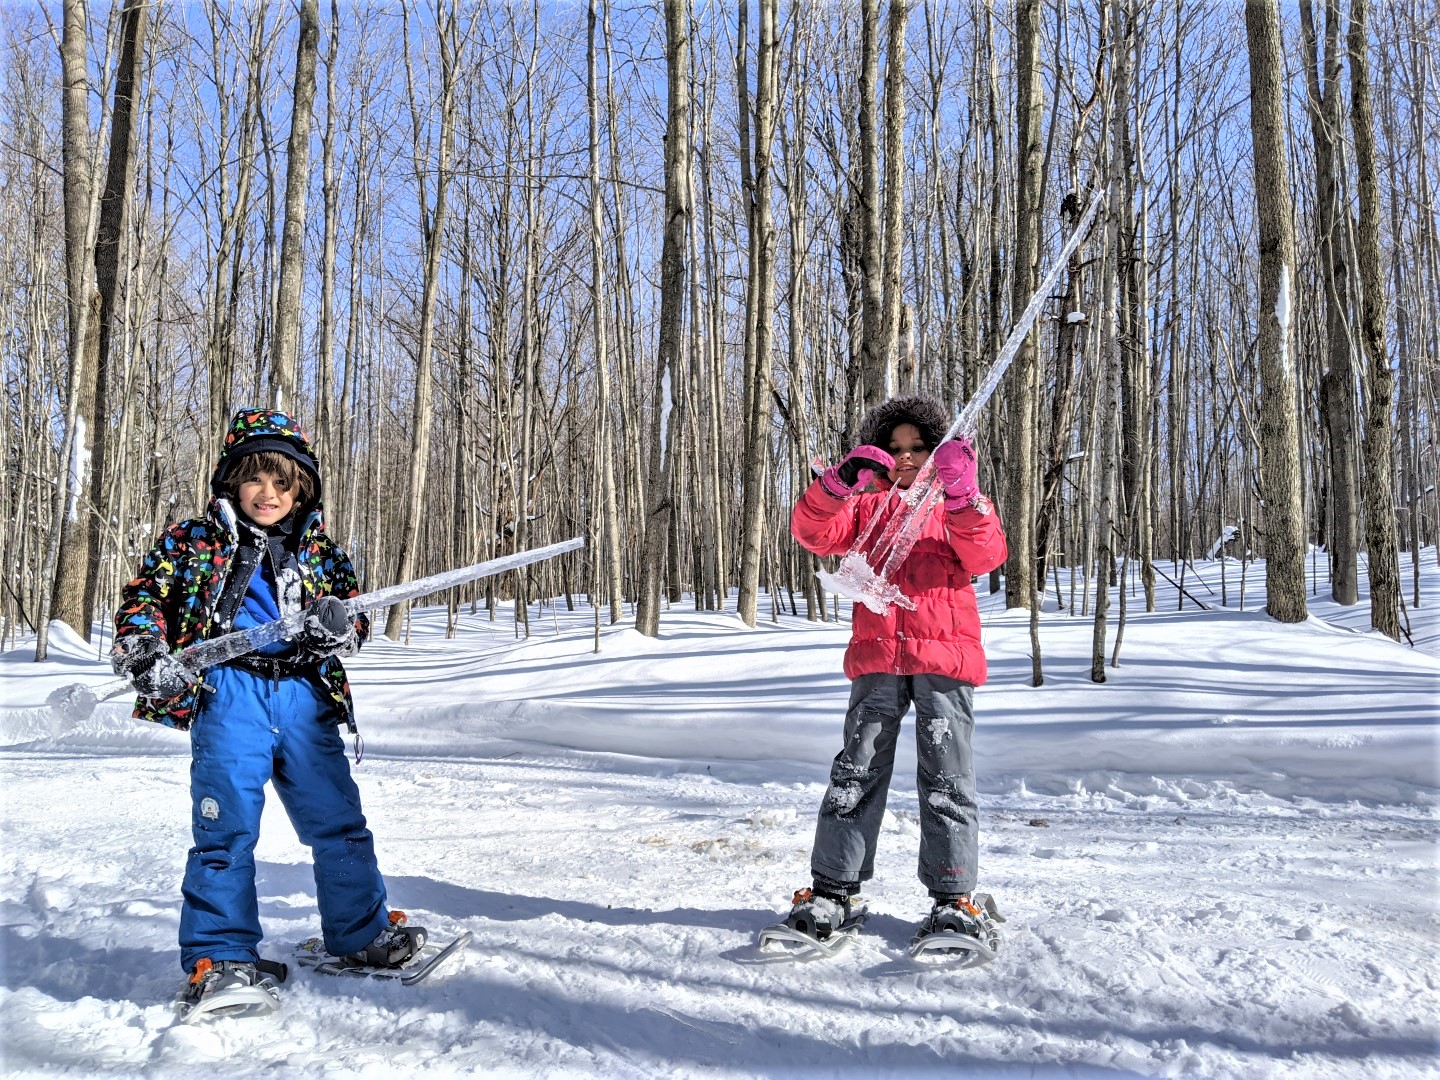 Snow shoeing with kids in Ontario